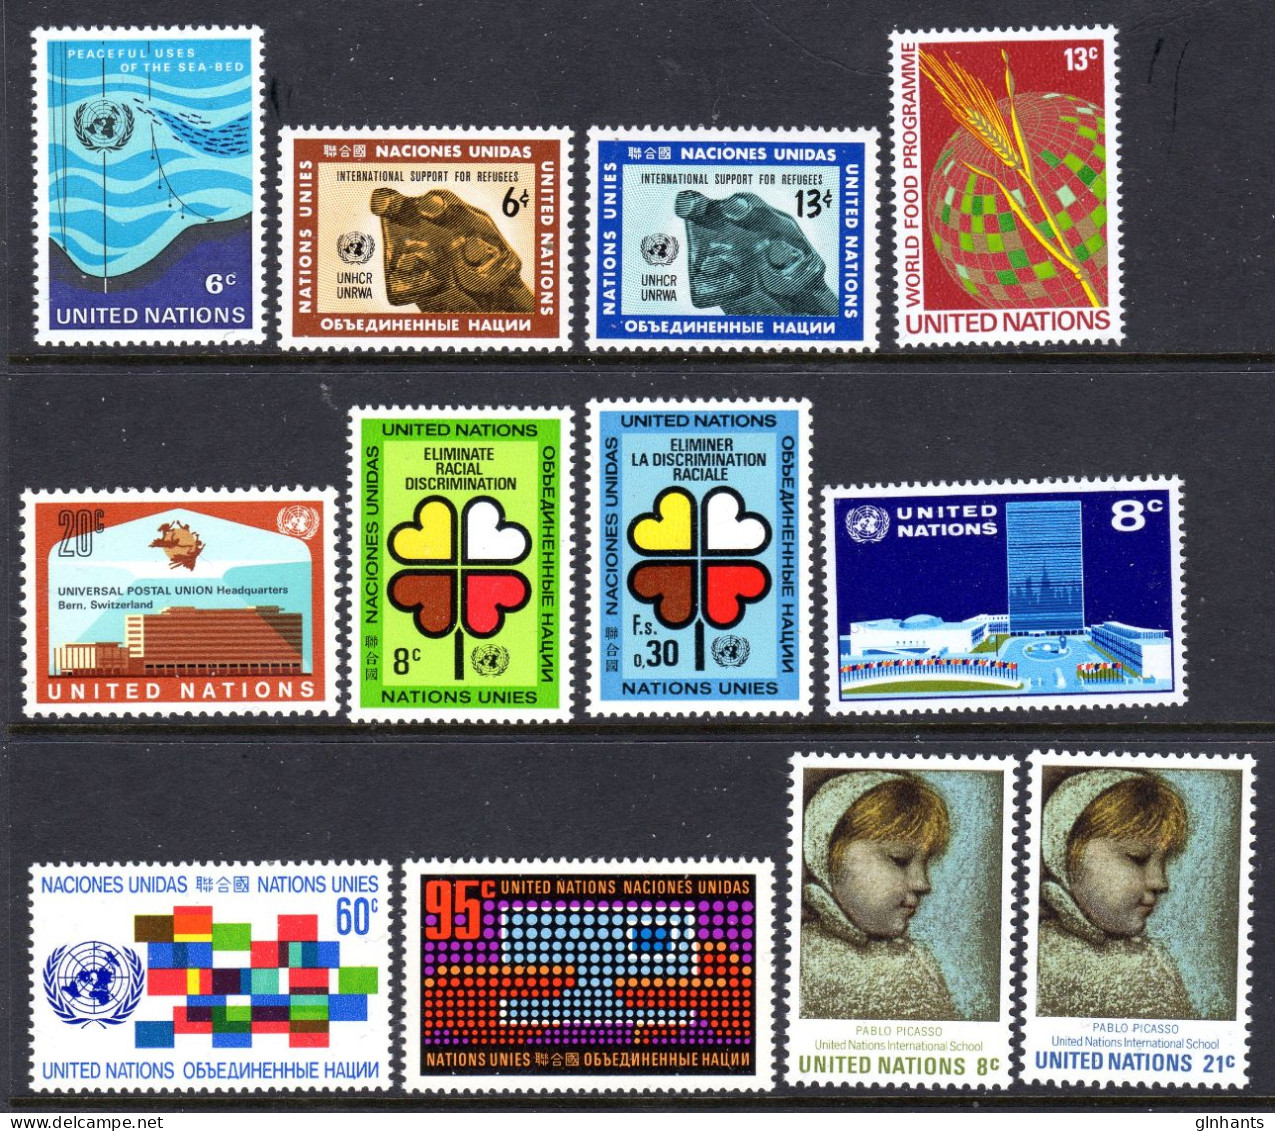 UNITED NATIONS UN NEW YORK - 1971 COMPLETE YEAR SET (12V) AS PICTURED FINE MNH ** SG 215-226 - Unused Stamps